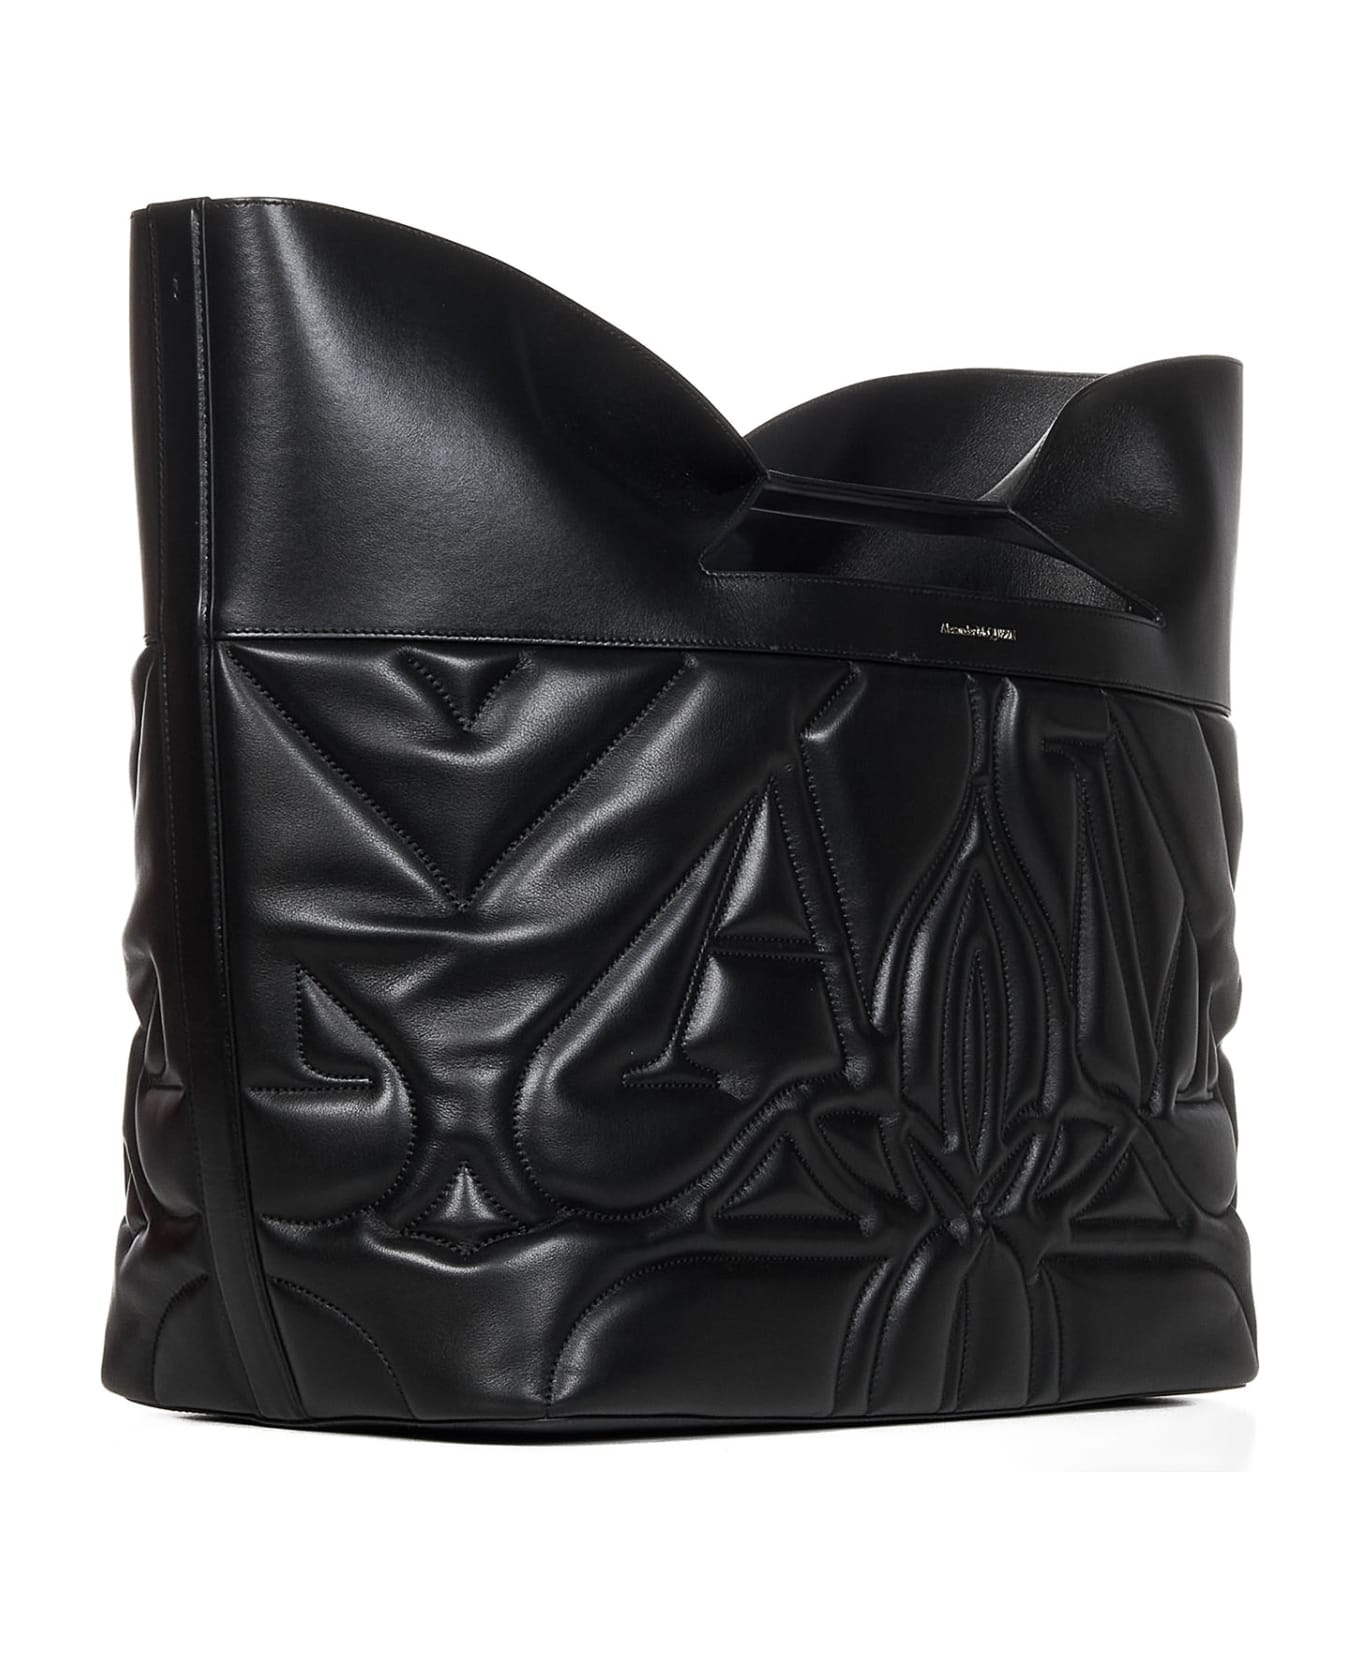 Alexander McQueen The Bow Tote - Black